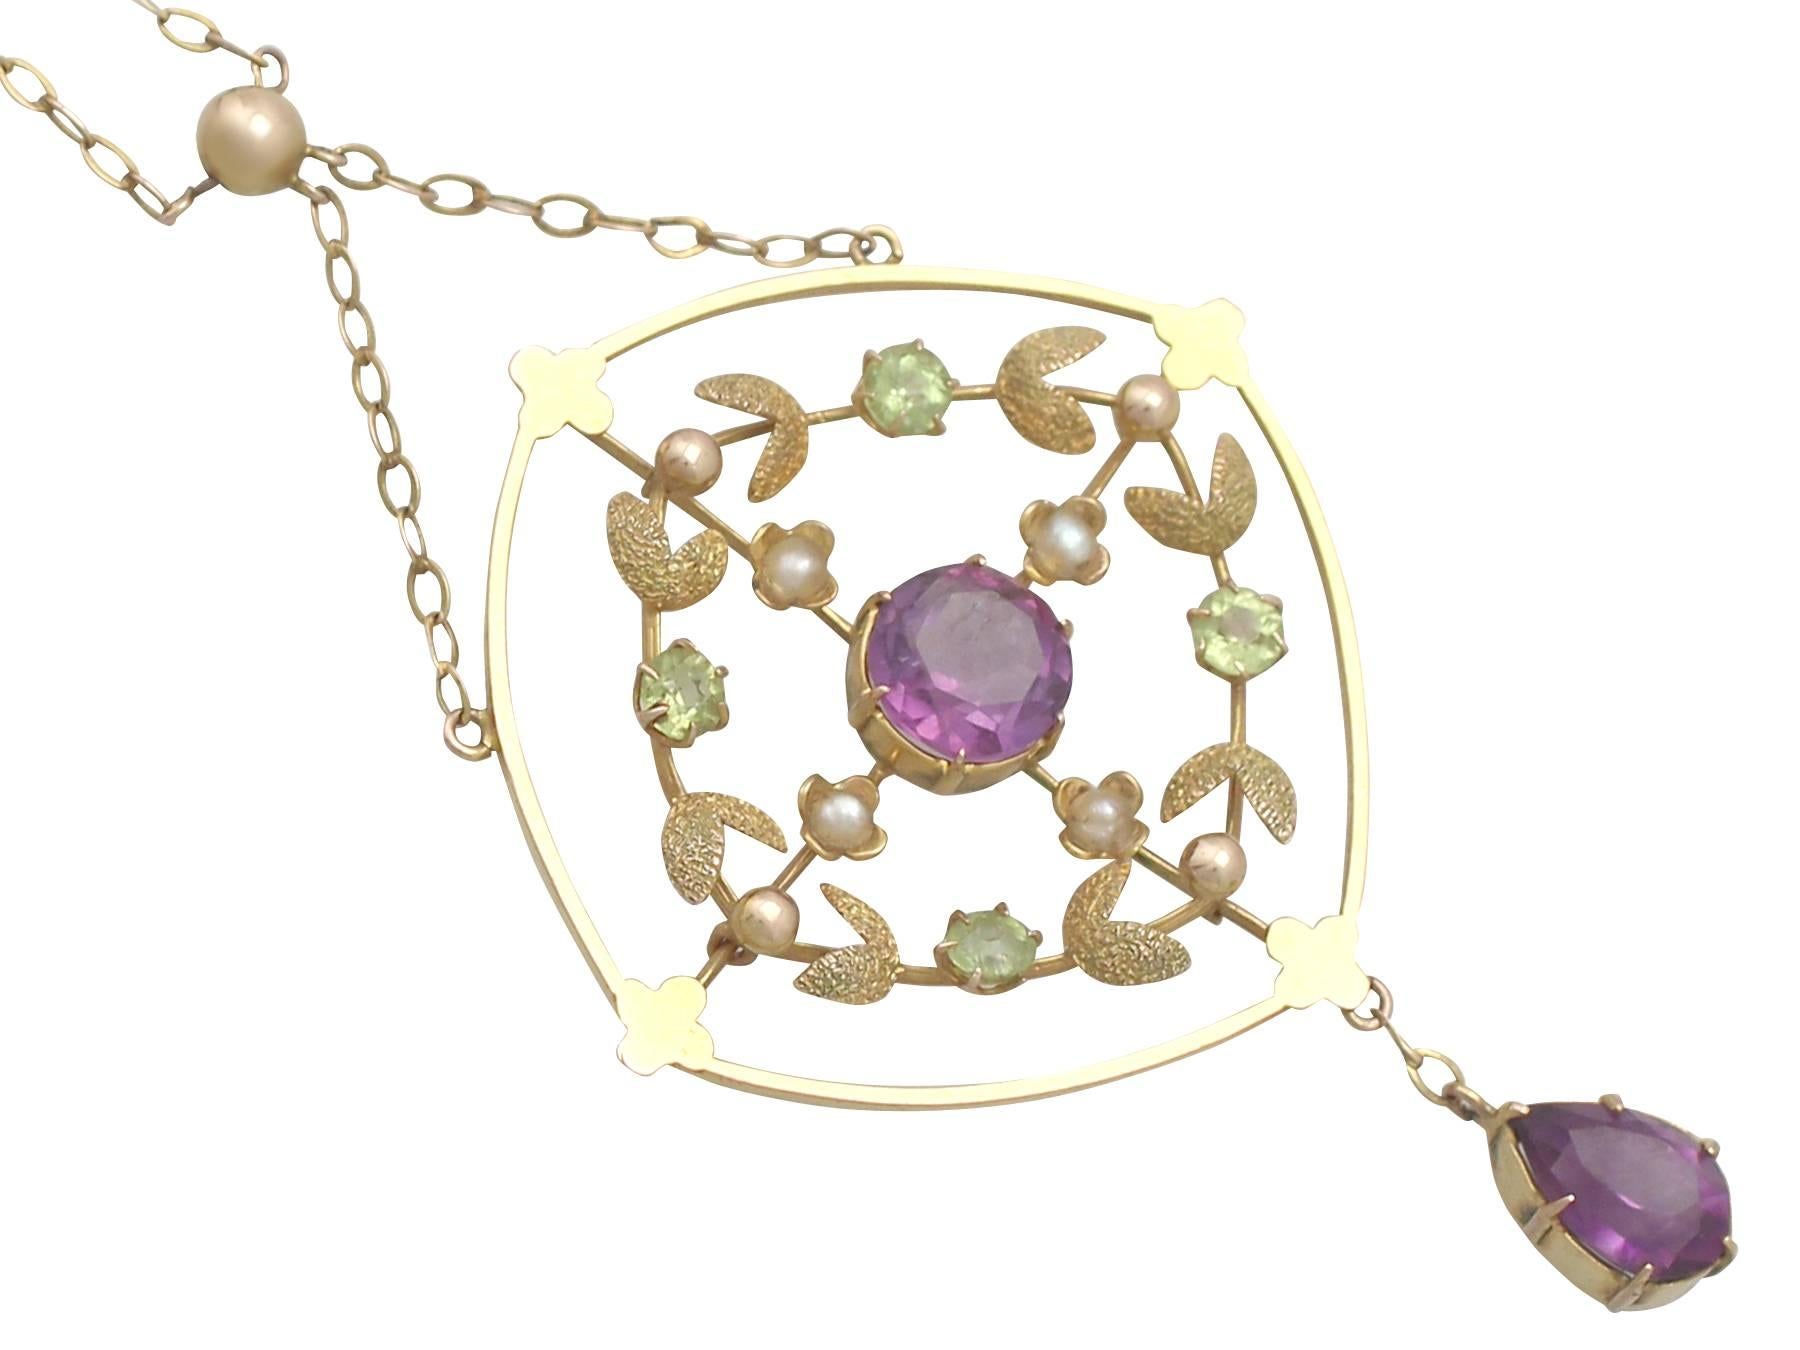 This fine and impressive amethyst pendant has been crafted in 12k yellow gold with a 9K yellow gold chain.

The pendant incorporates colours* adopted by the women's organisation the 'Women's Social and Political Union' (WSPU), with which the